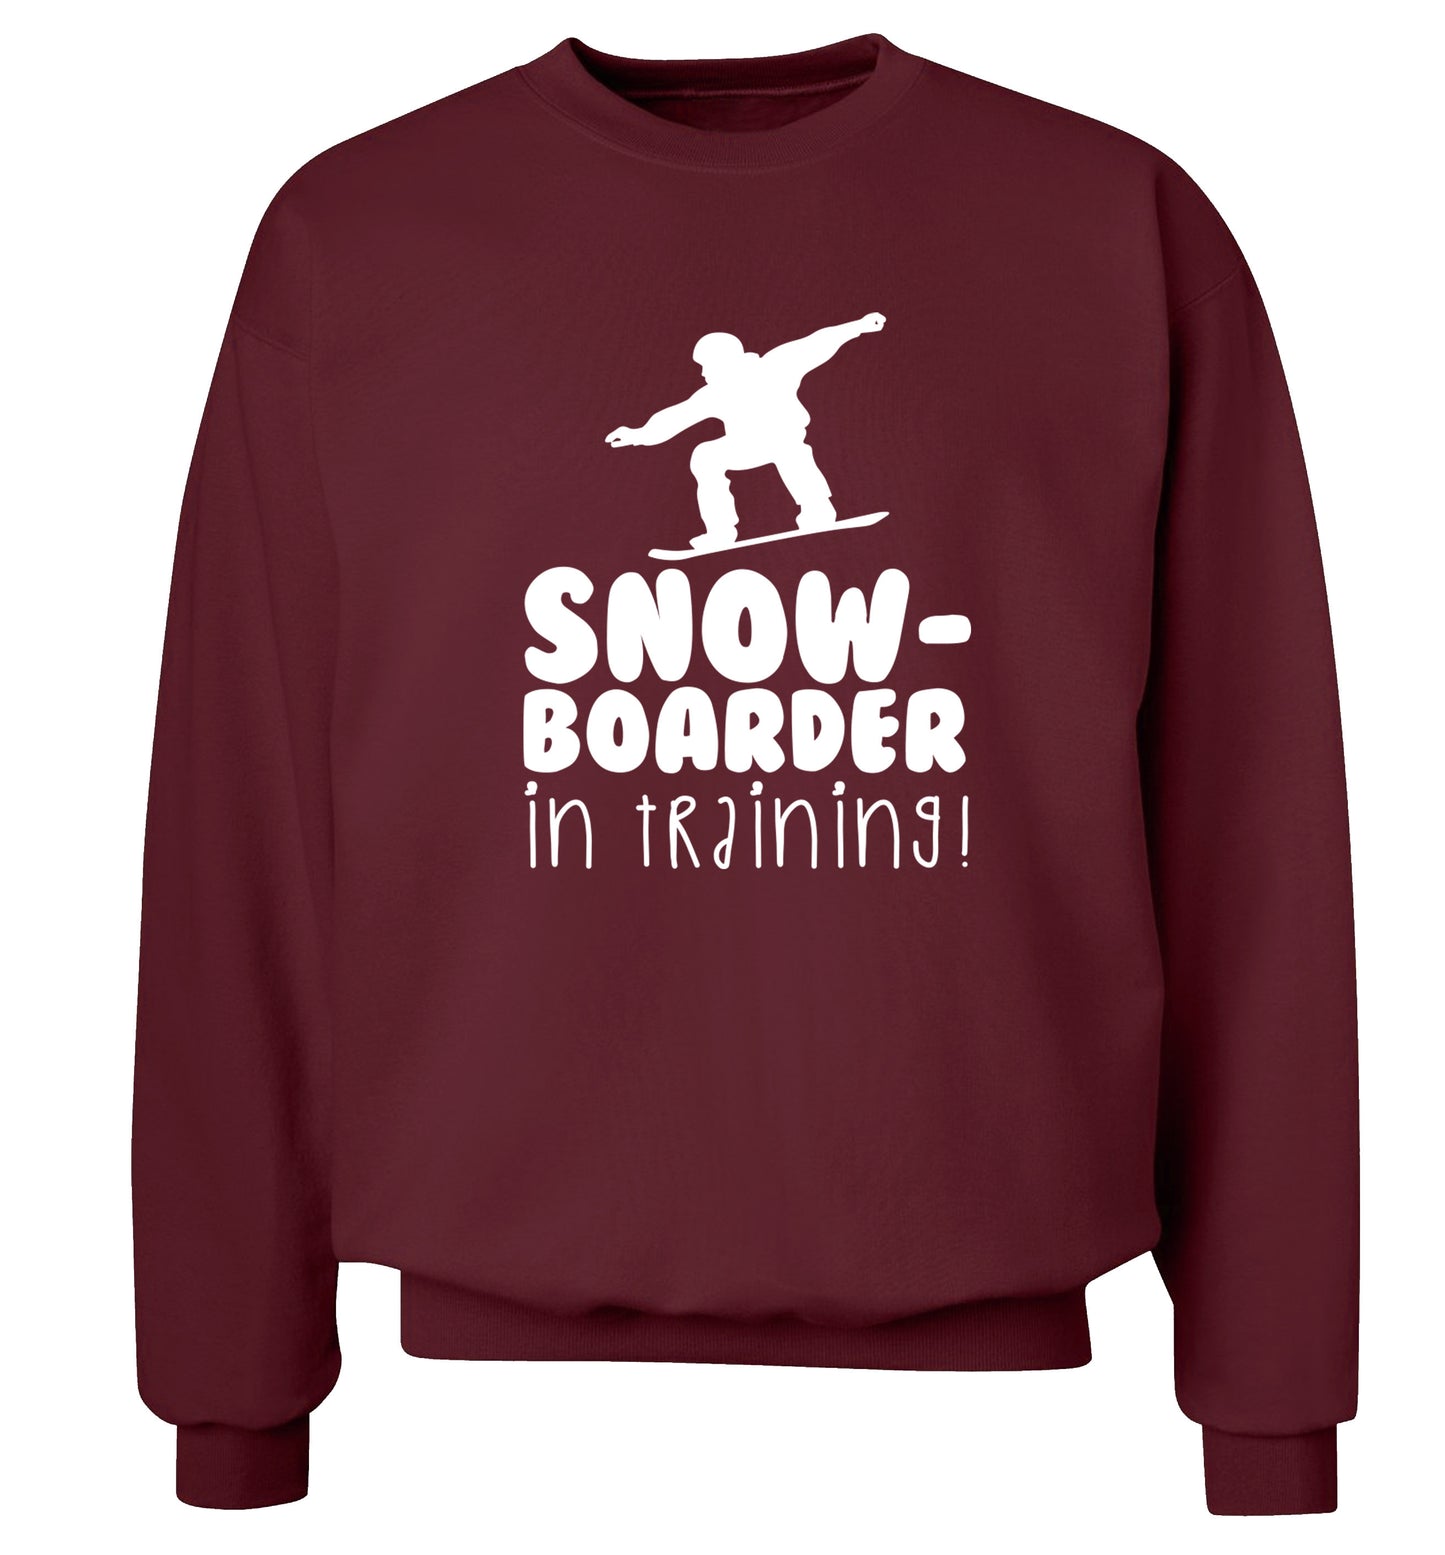 Snowboarder in training Adult's unisex maroon Sweater 2XL